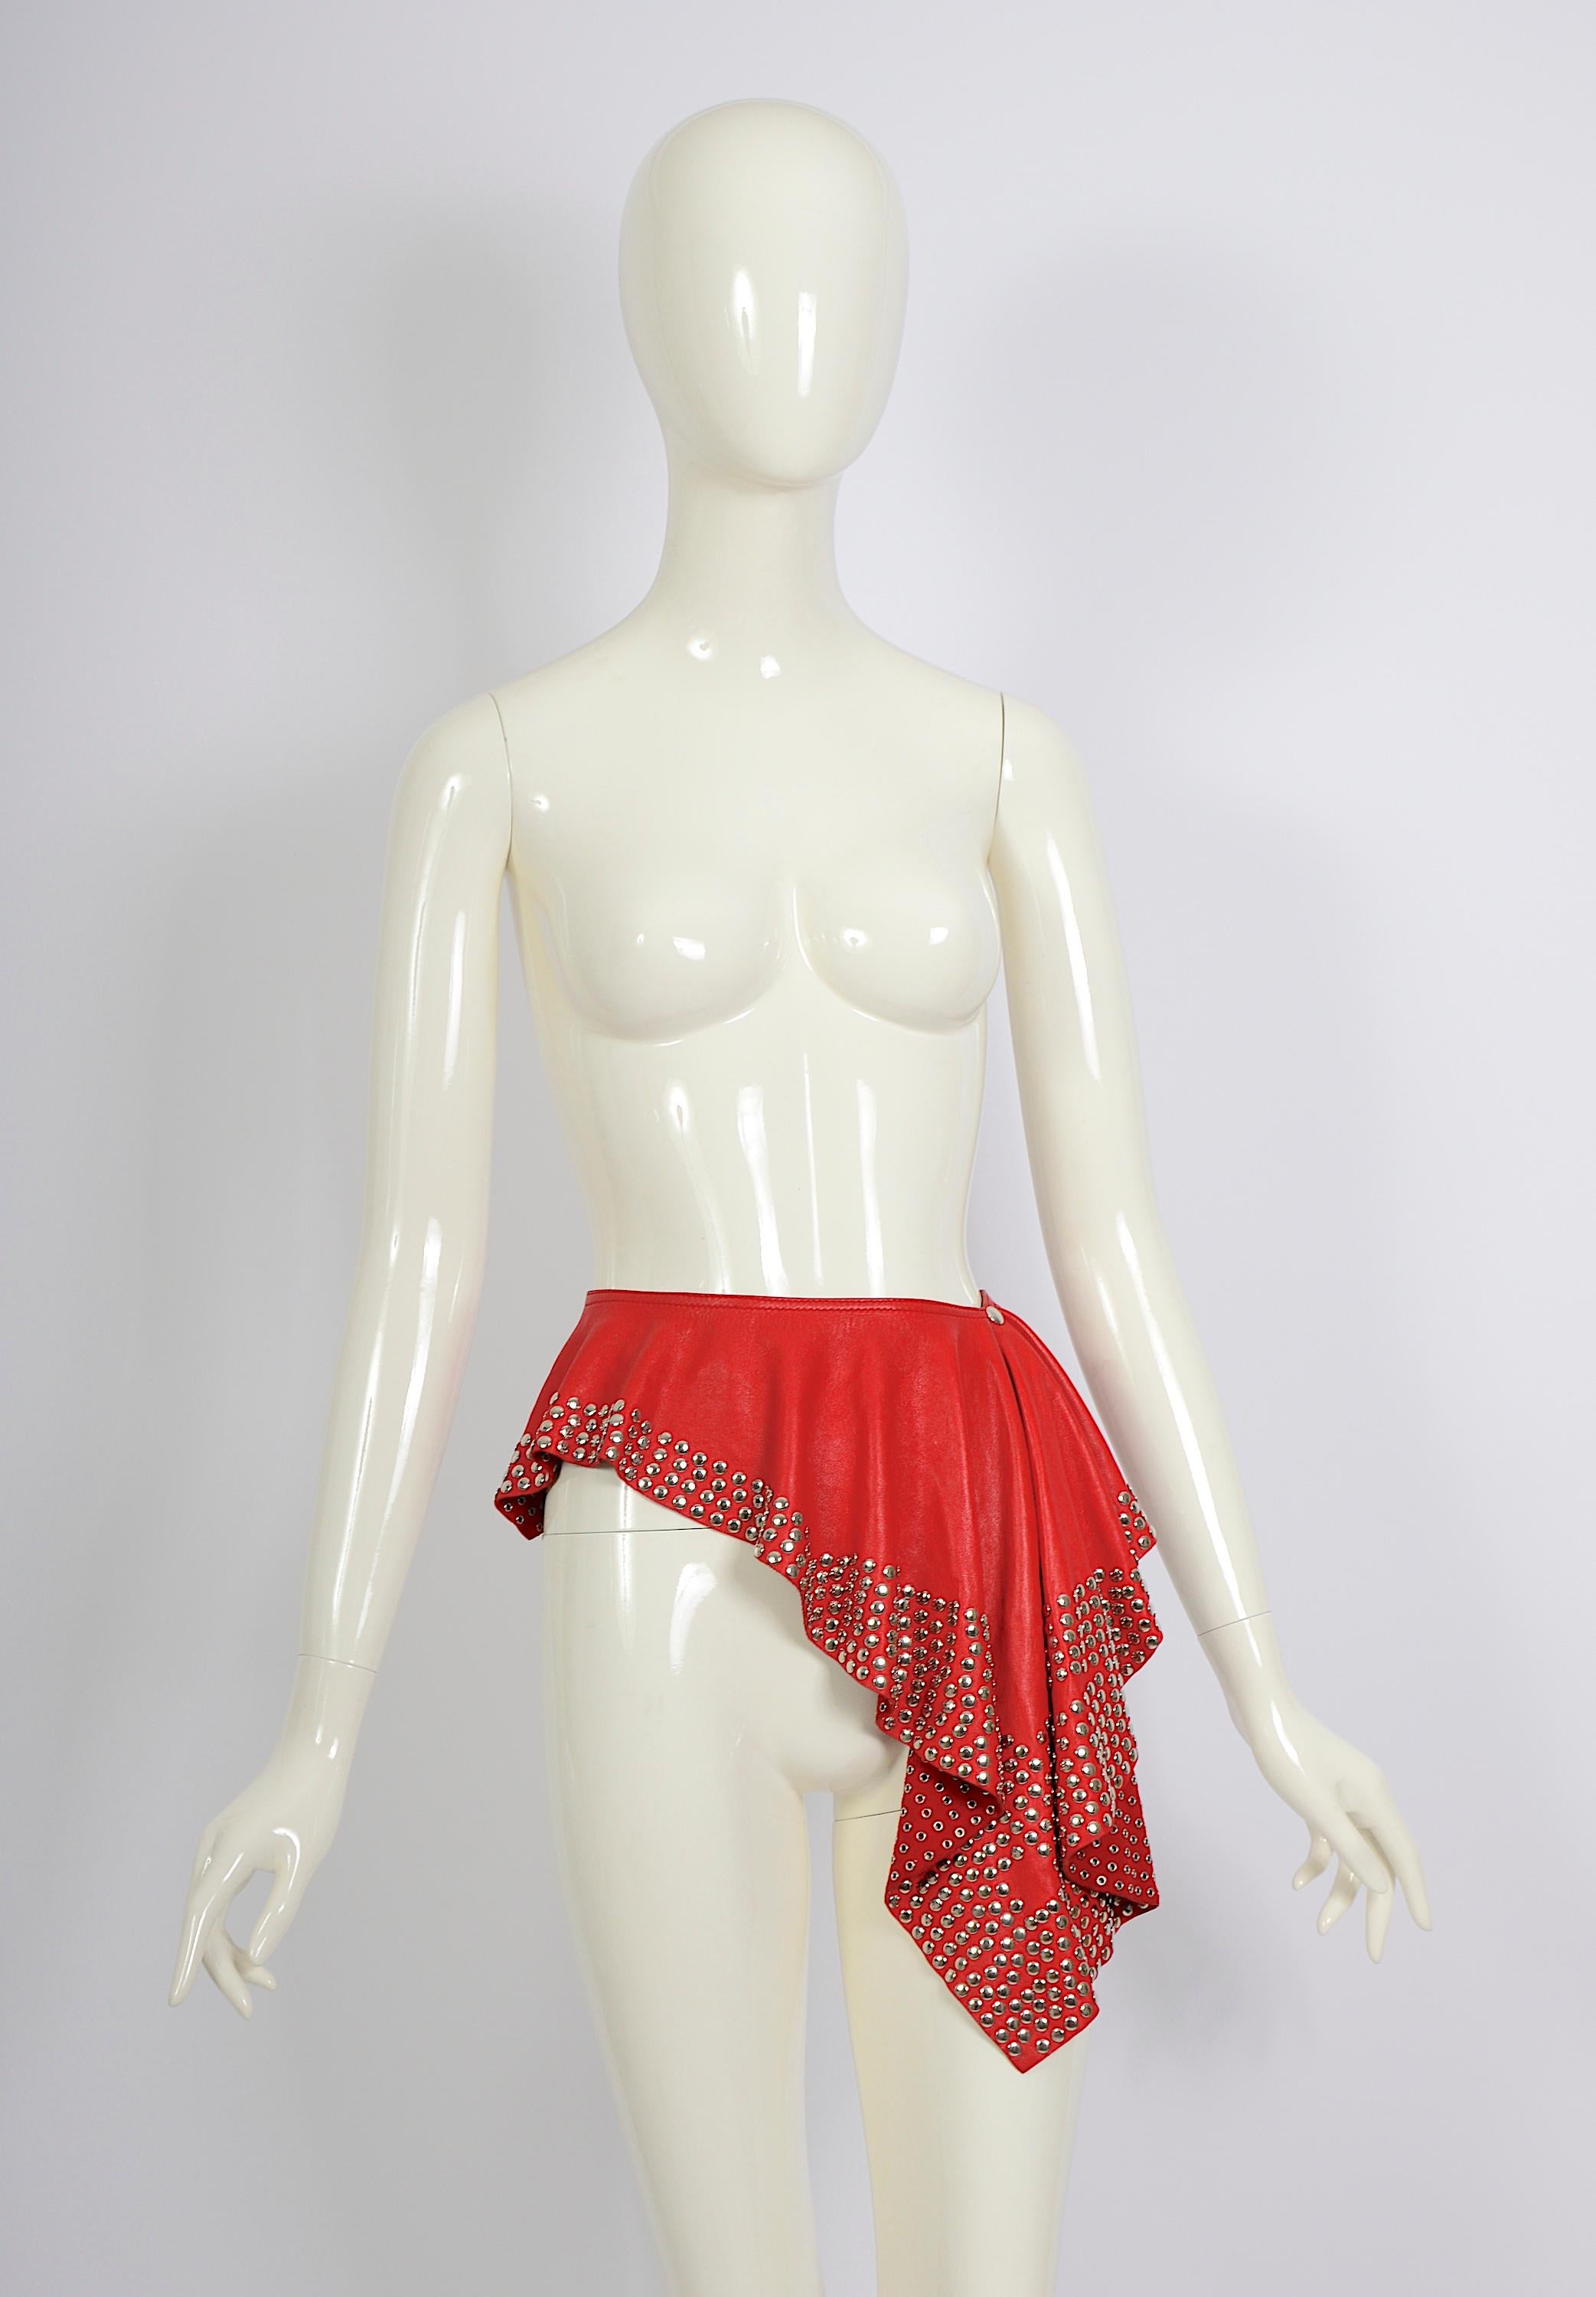 Azzedine Alaia circa 1981 collectionneurs Studded embellished red leather belt skirt en vente 12